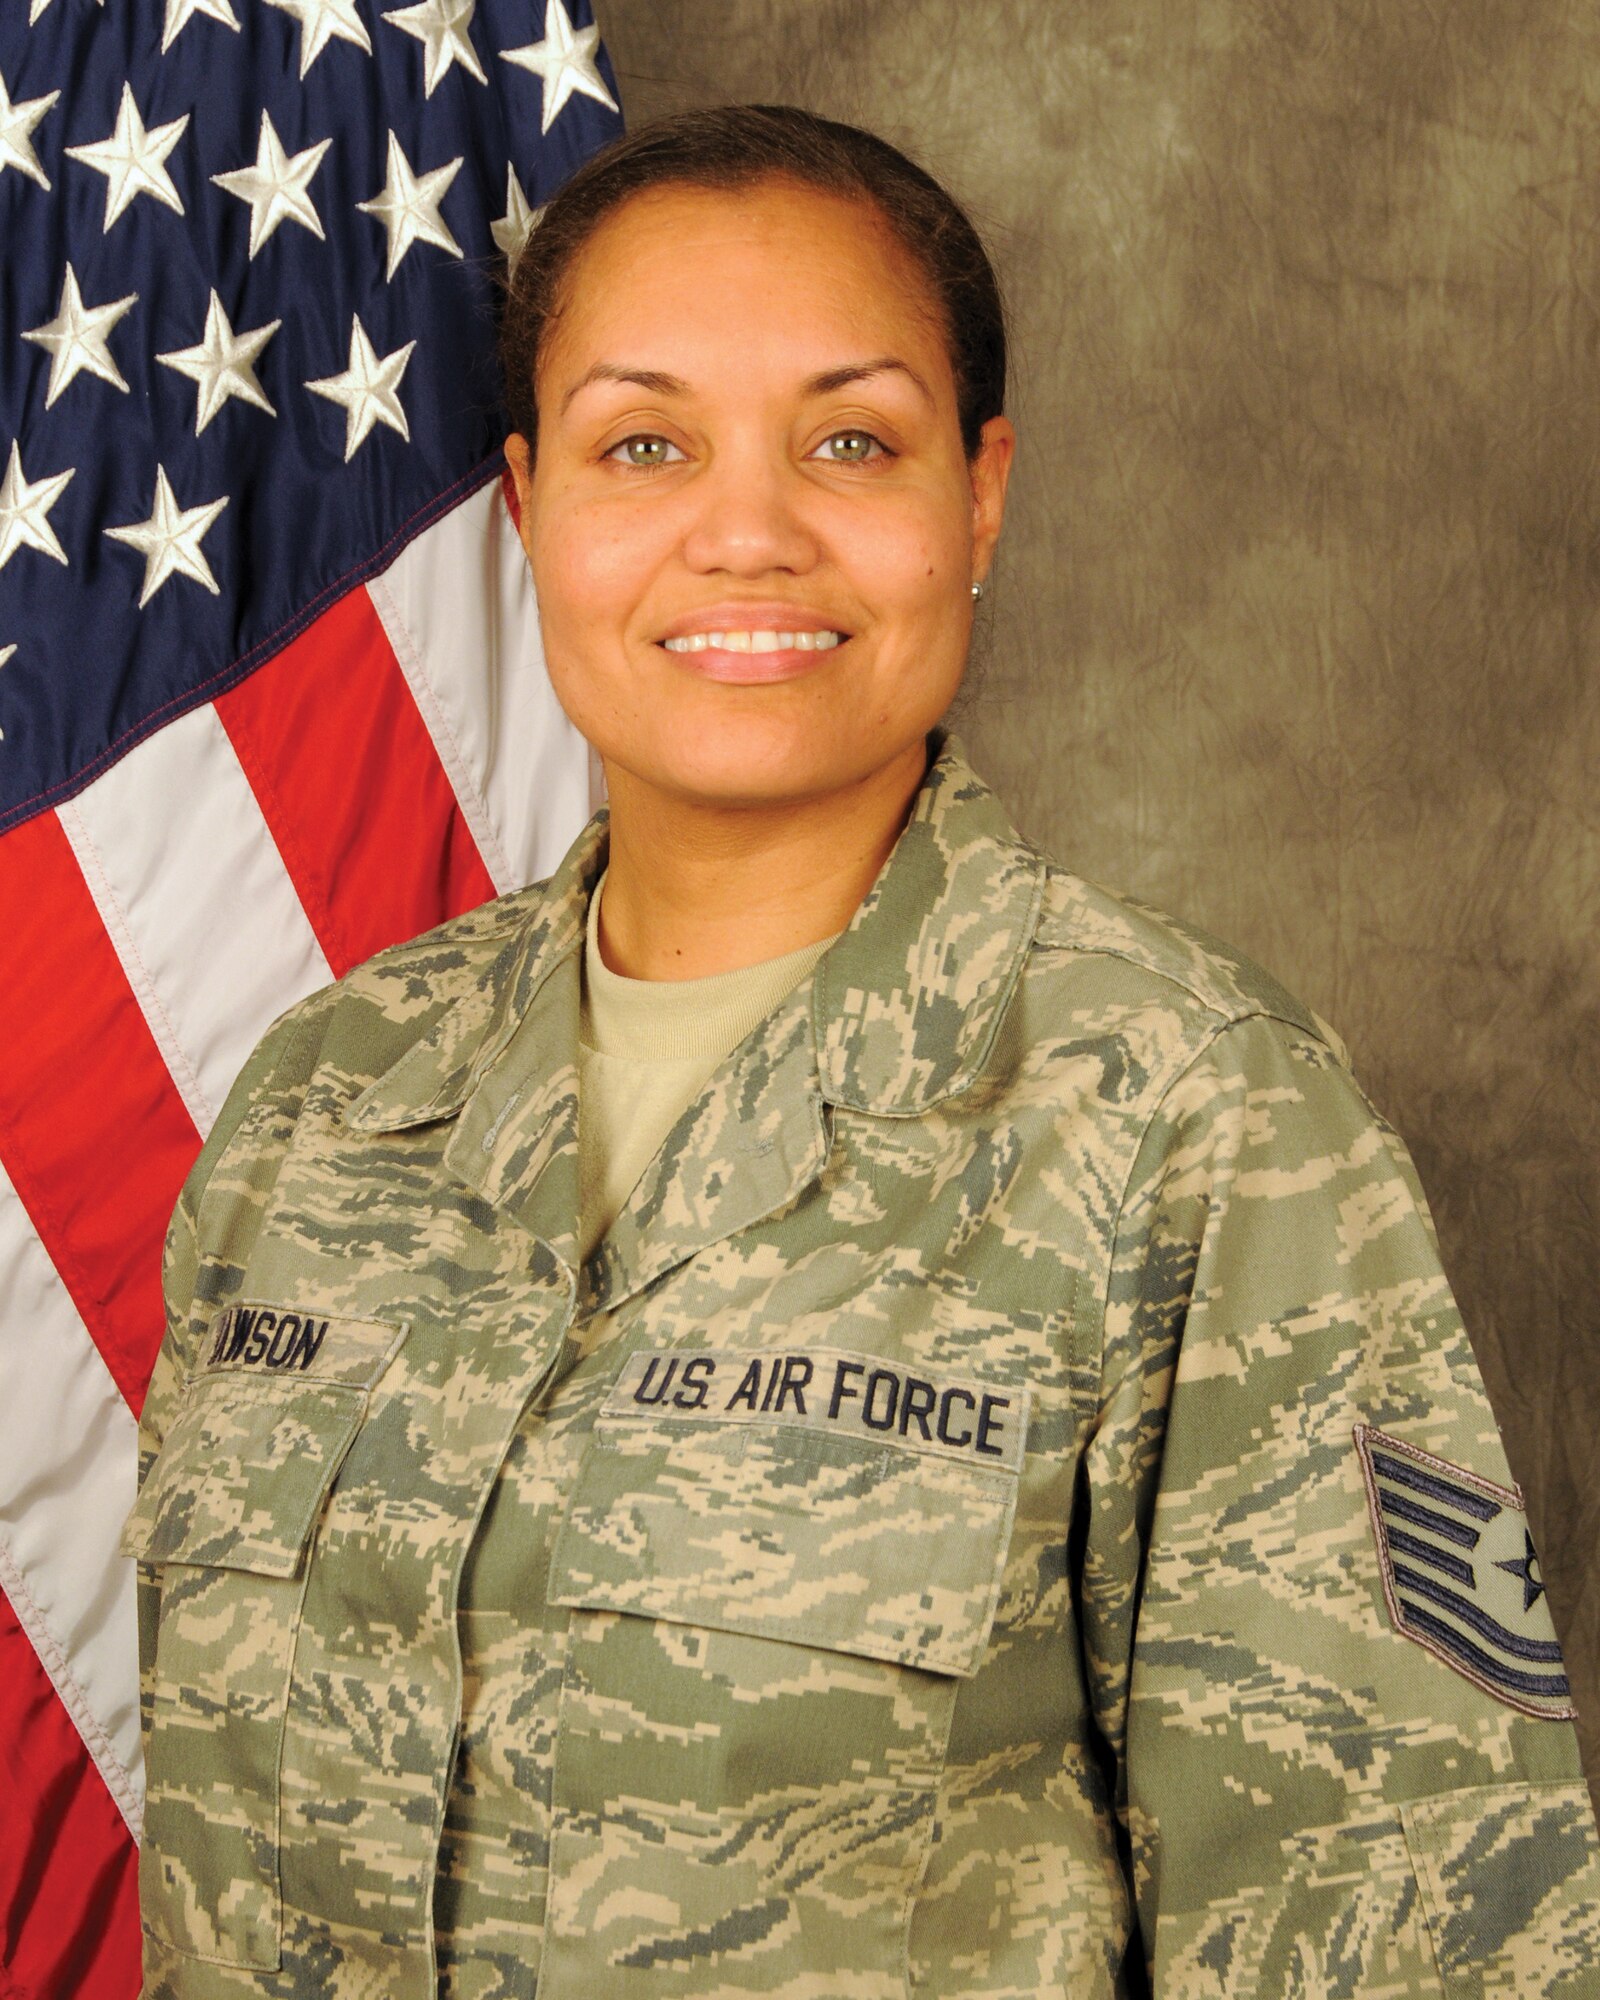 WRIGHT-PATTERSON AIR FORCE BASE, Ohio - Tech. Sgt. Tiffany Lawson, 445th Airlift Wing equal opportunity advisor, is the 445th Airlift Wing NCO of the Quarter, first quarter. (U.S. Air Force photo/Tech. Sgt. Anthony Springer)